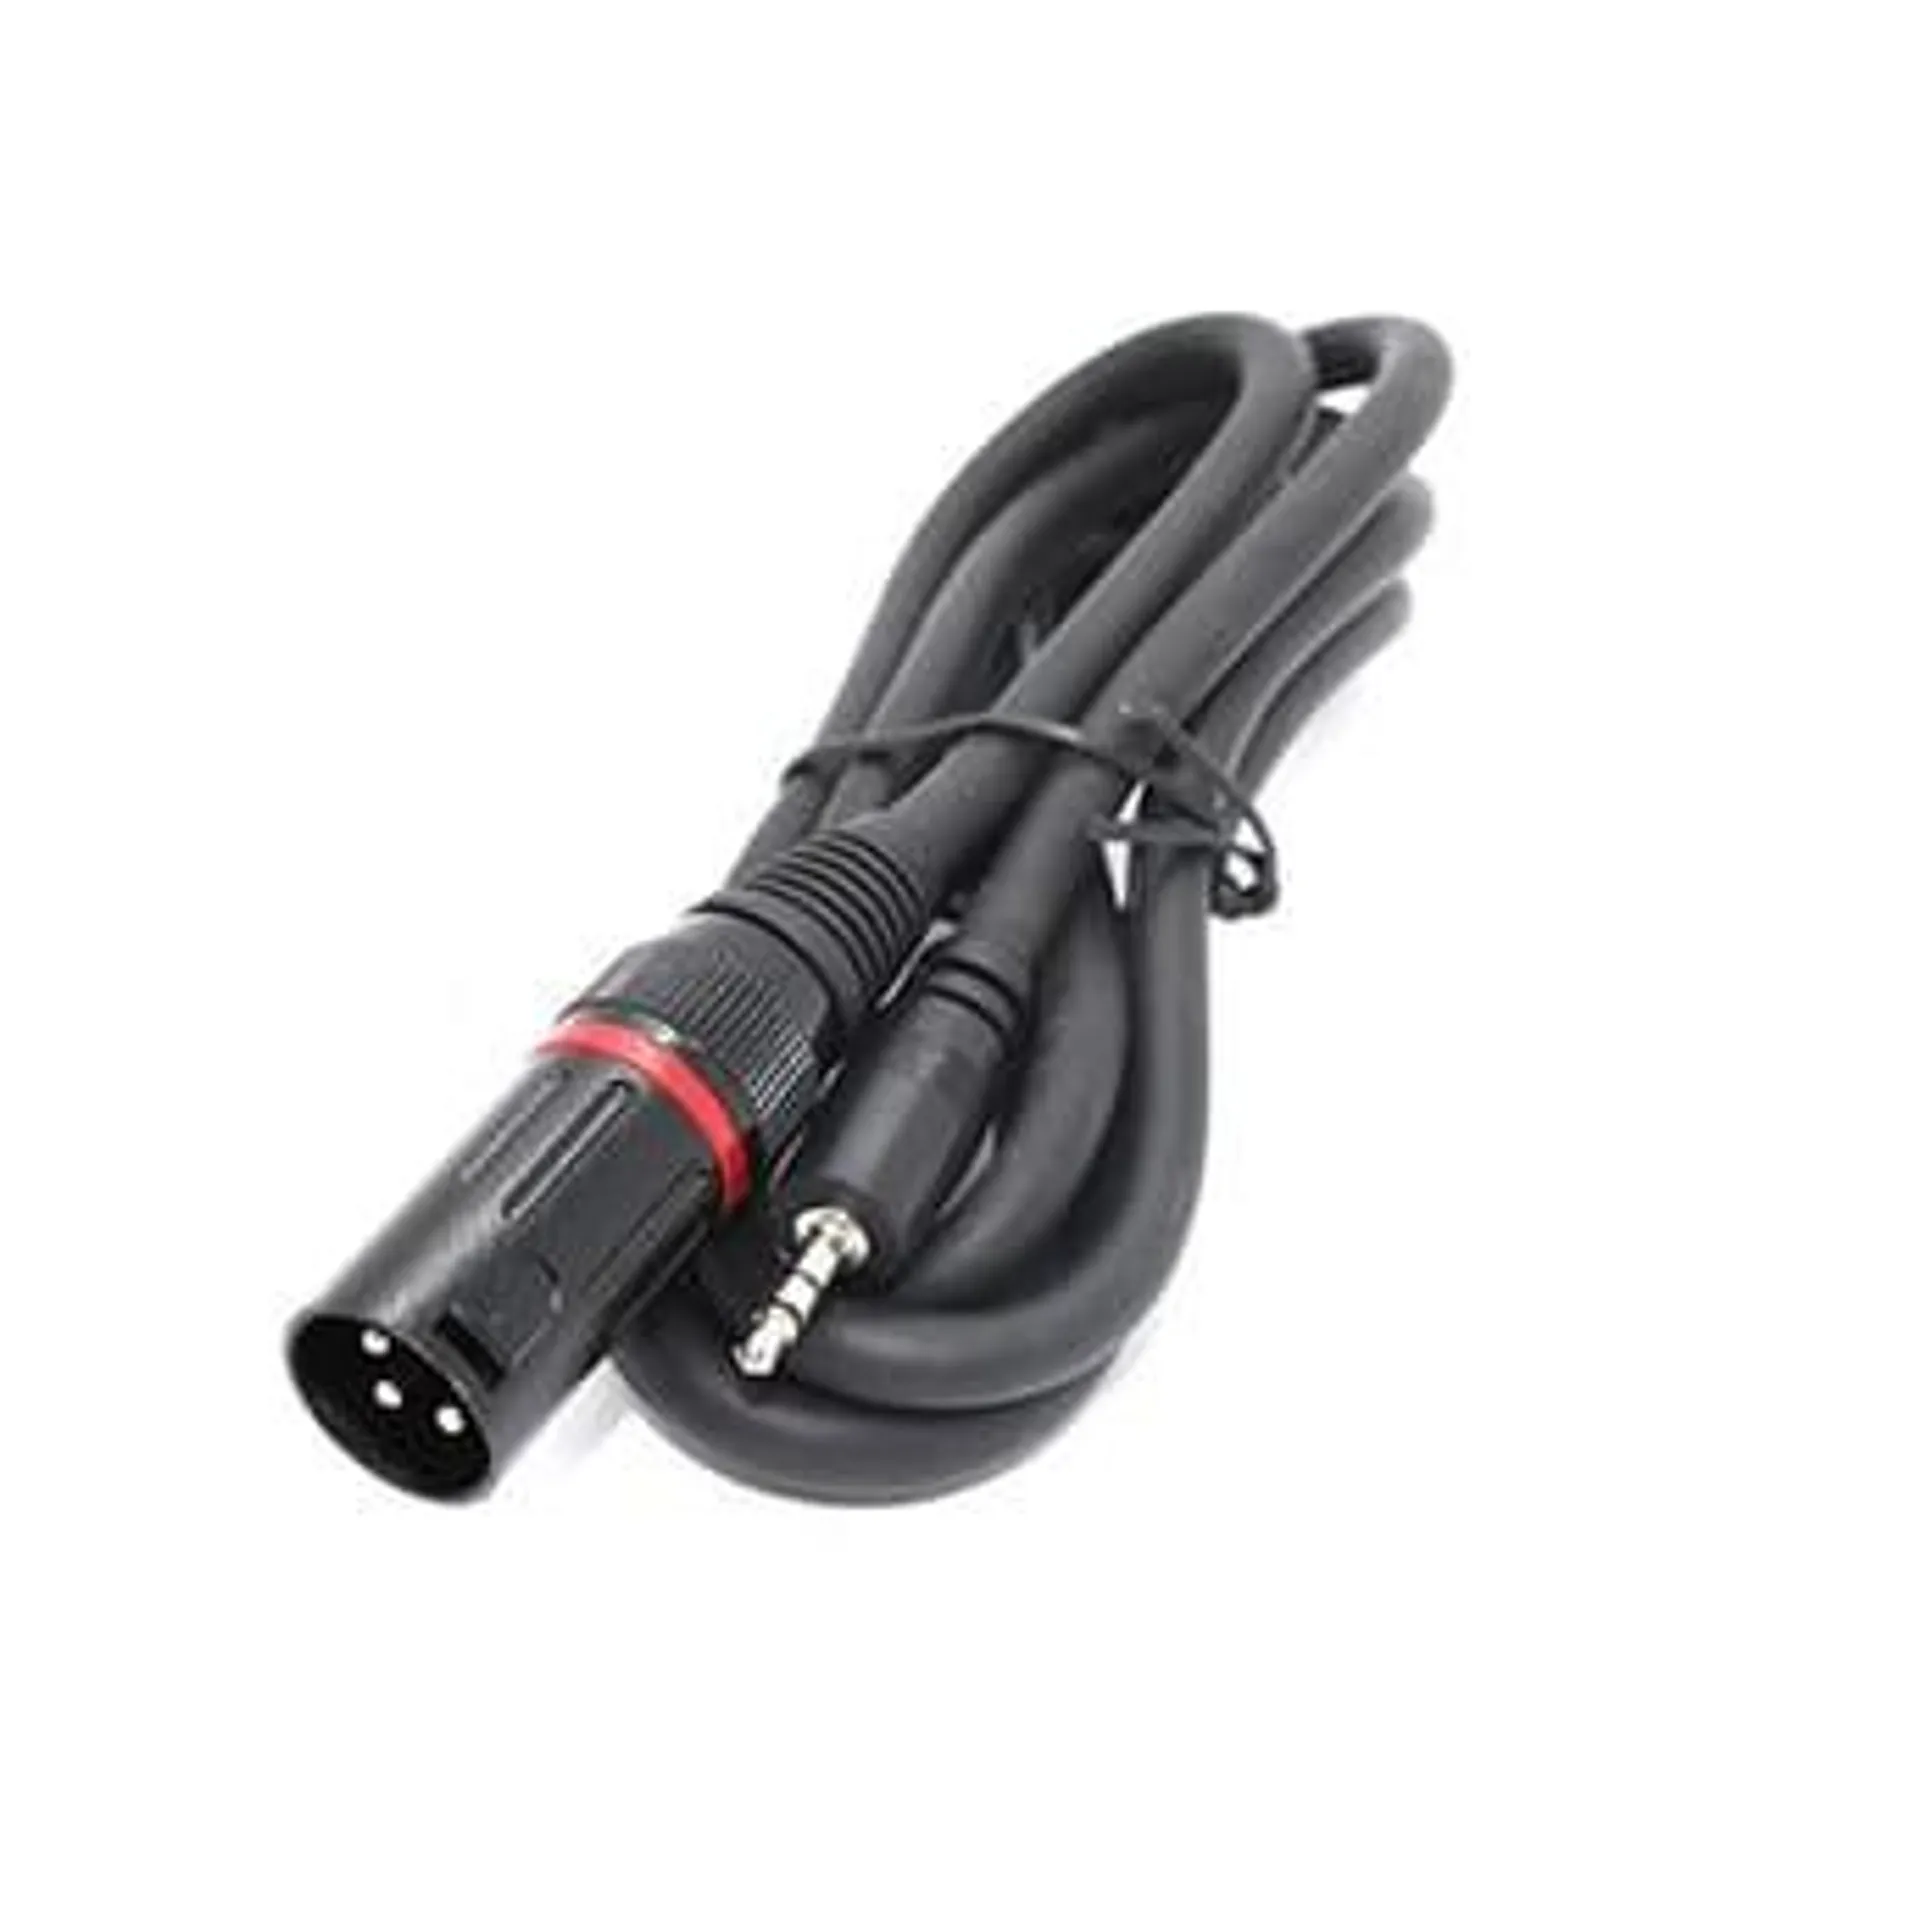 Cyberdyne 3.5mm Stereo Male Jack to XLR Male Cable (1.5m)